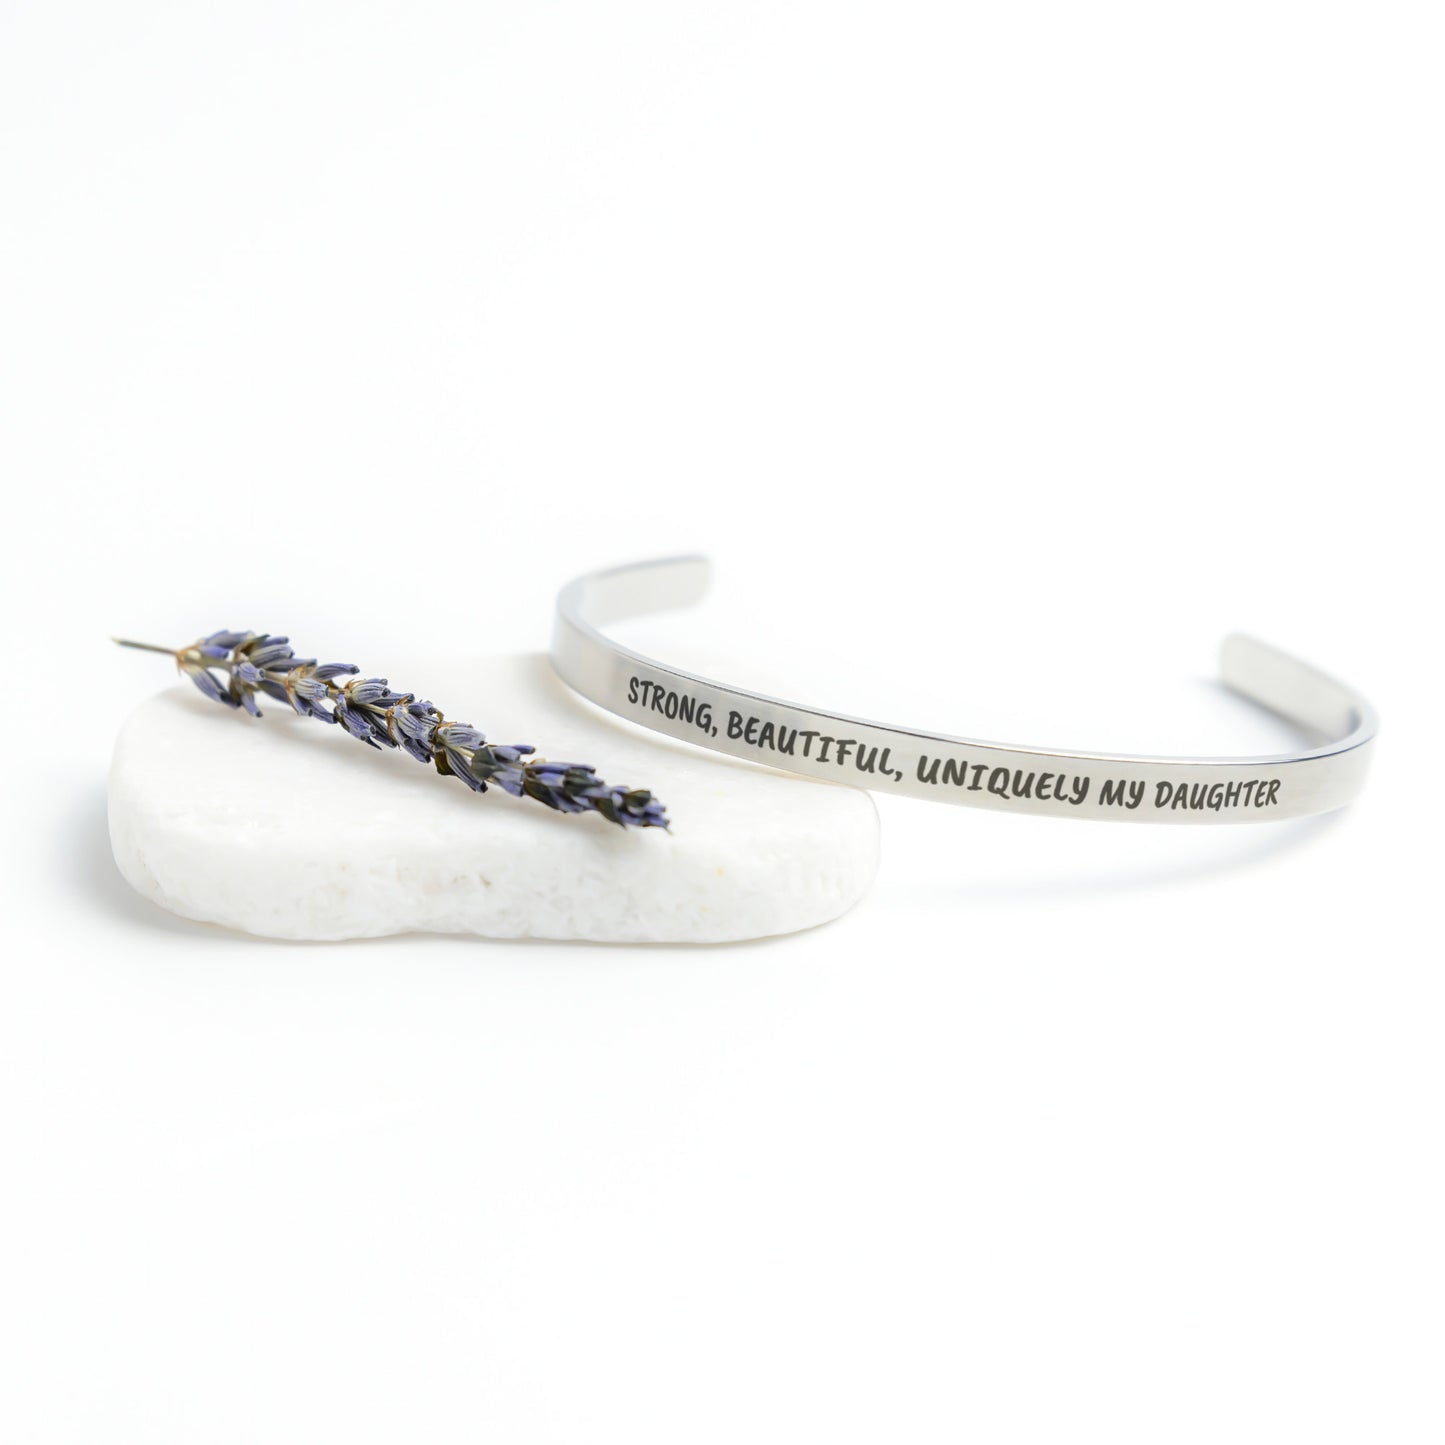 Strong, Beautiful, Uniquely My Daughter Cuff Bracelet